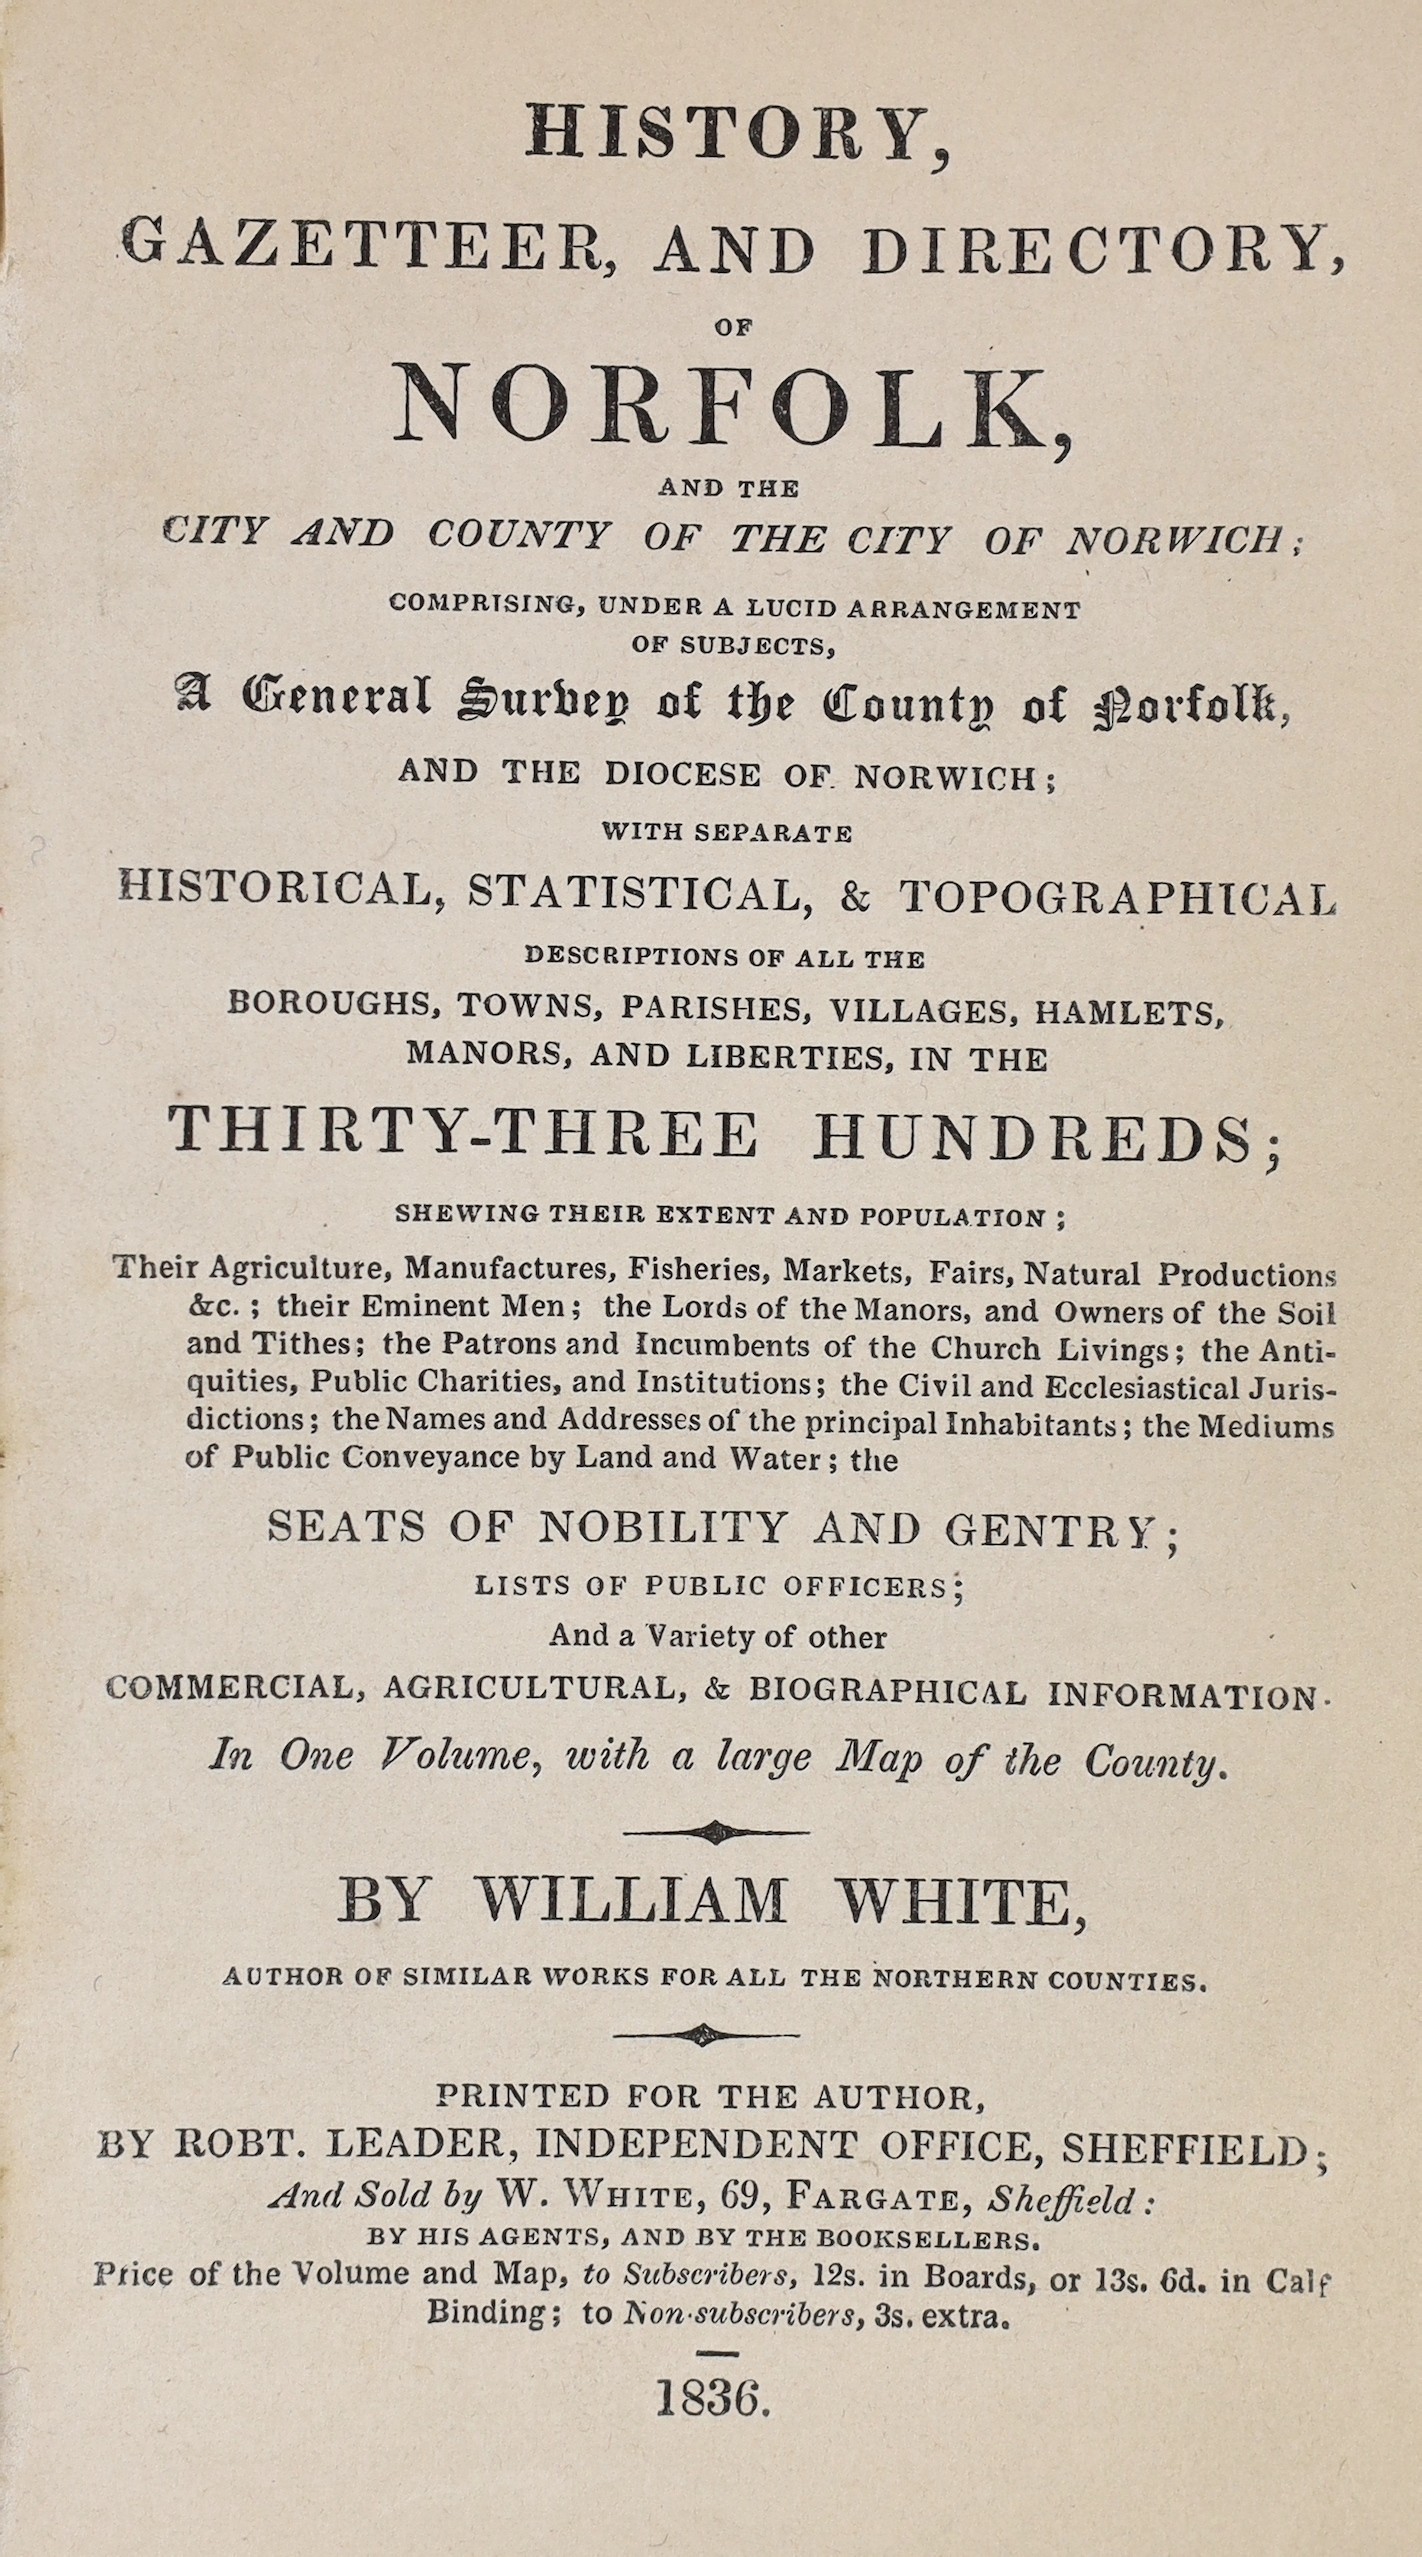 NORFOLK: White, William - History, Gazeteer, and Directory, of Norfolk, and the .... City of Norwich.... old gilt calf with marbled edges. Sheffield: printed for the Author....1836